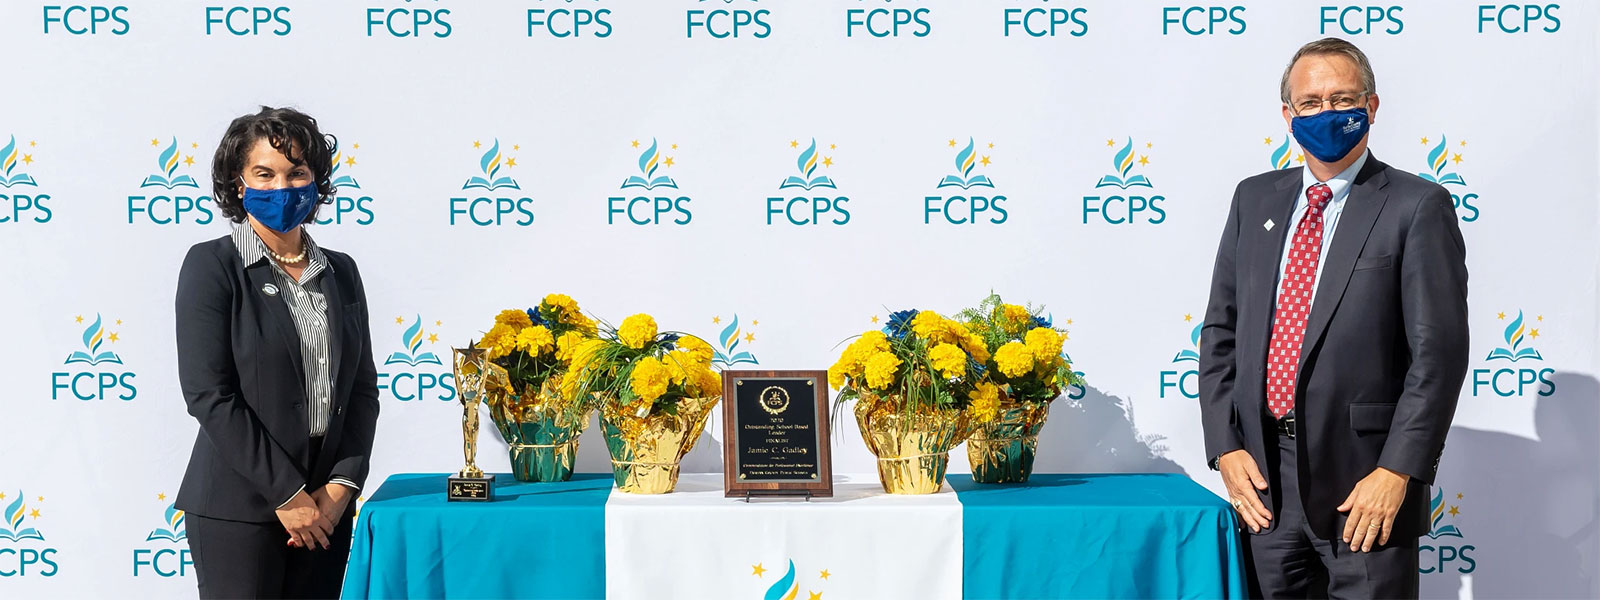 jamie gadley at fcps honors recognition event